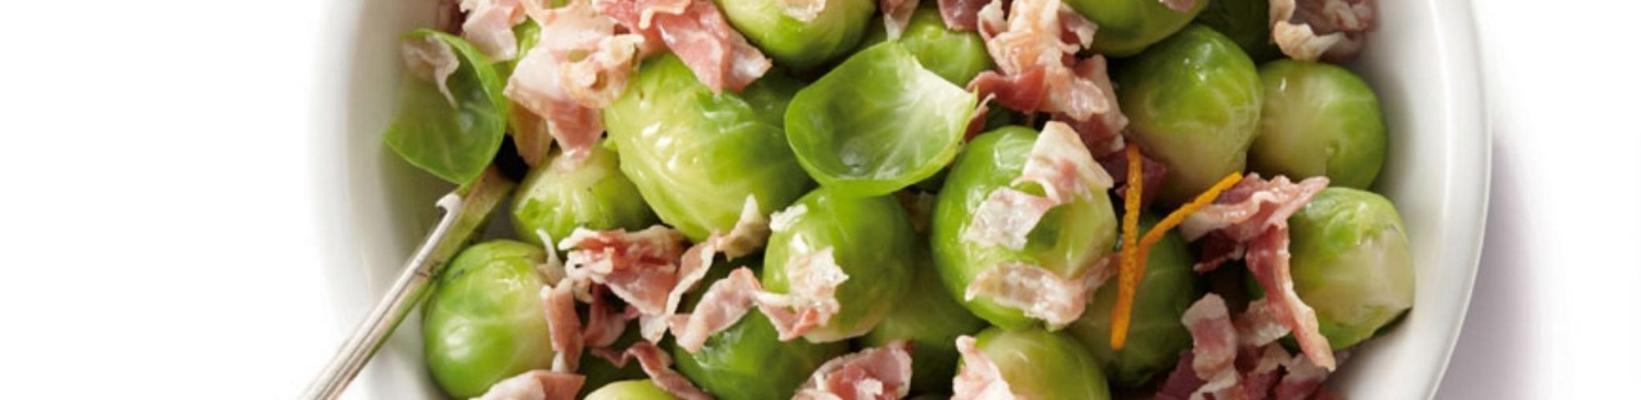 Brussels sprouts with pancetta and orange